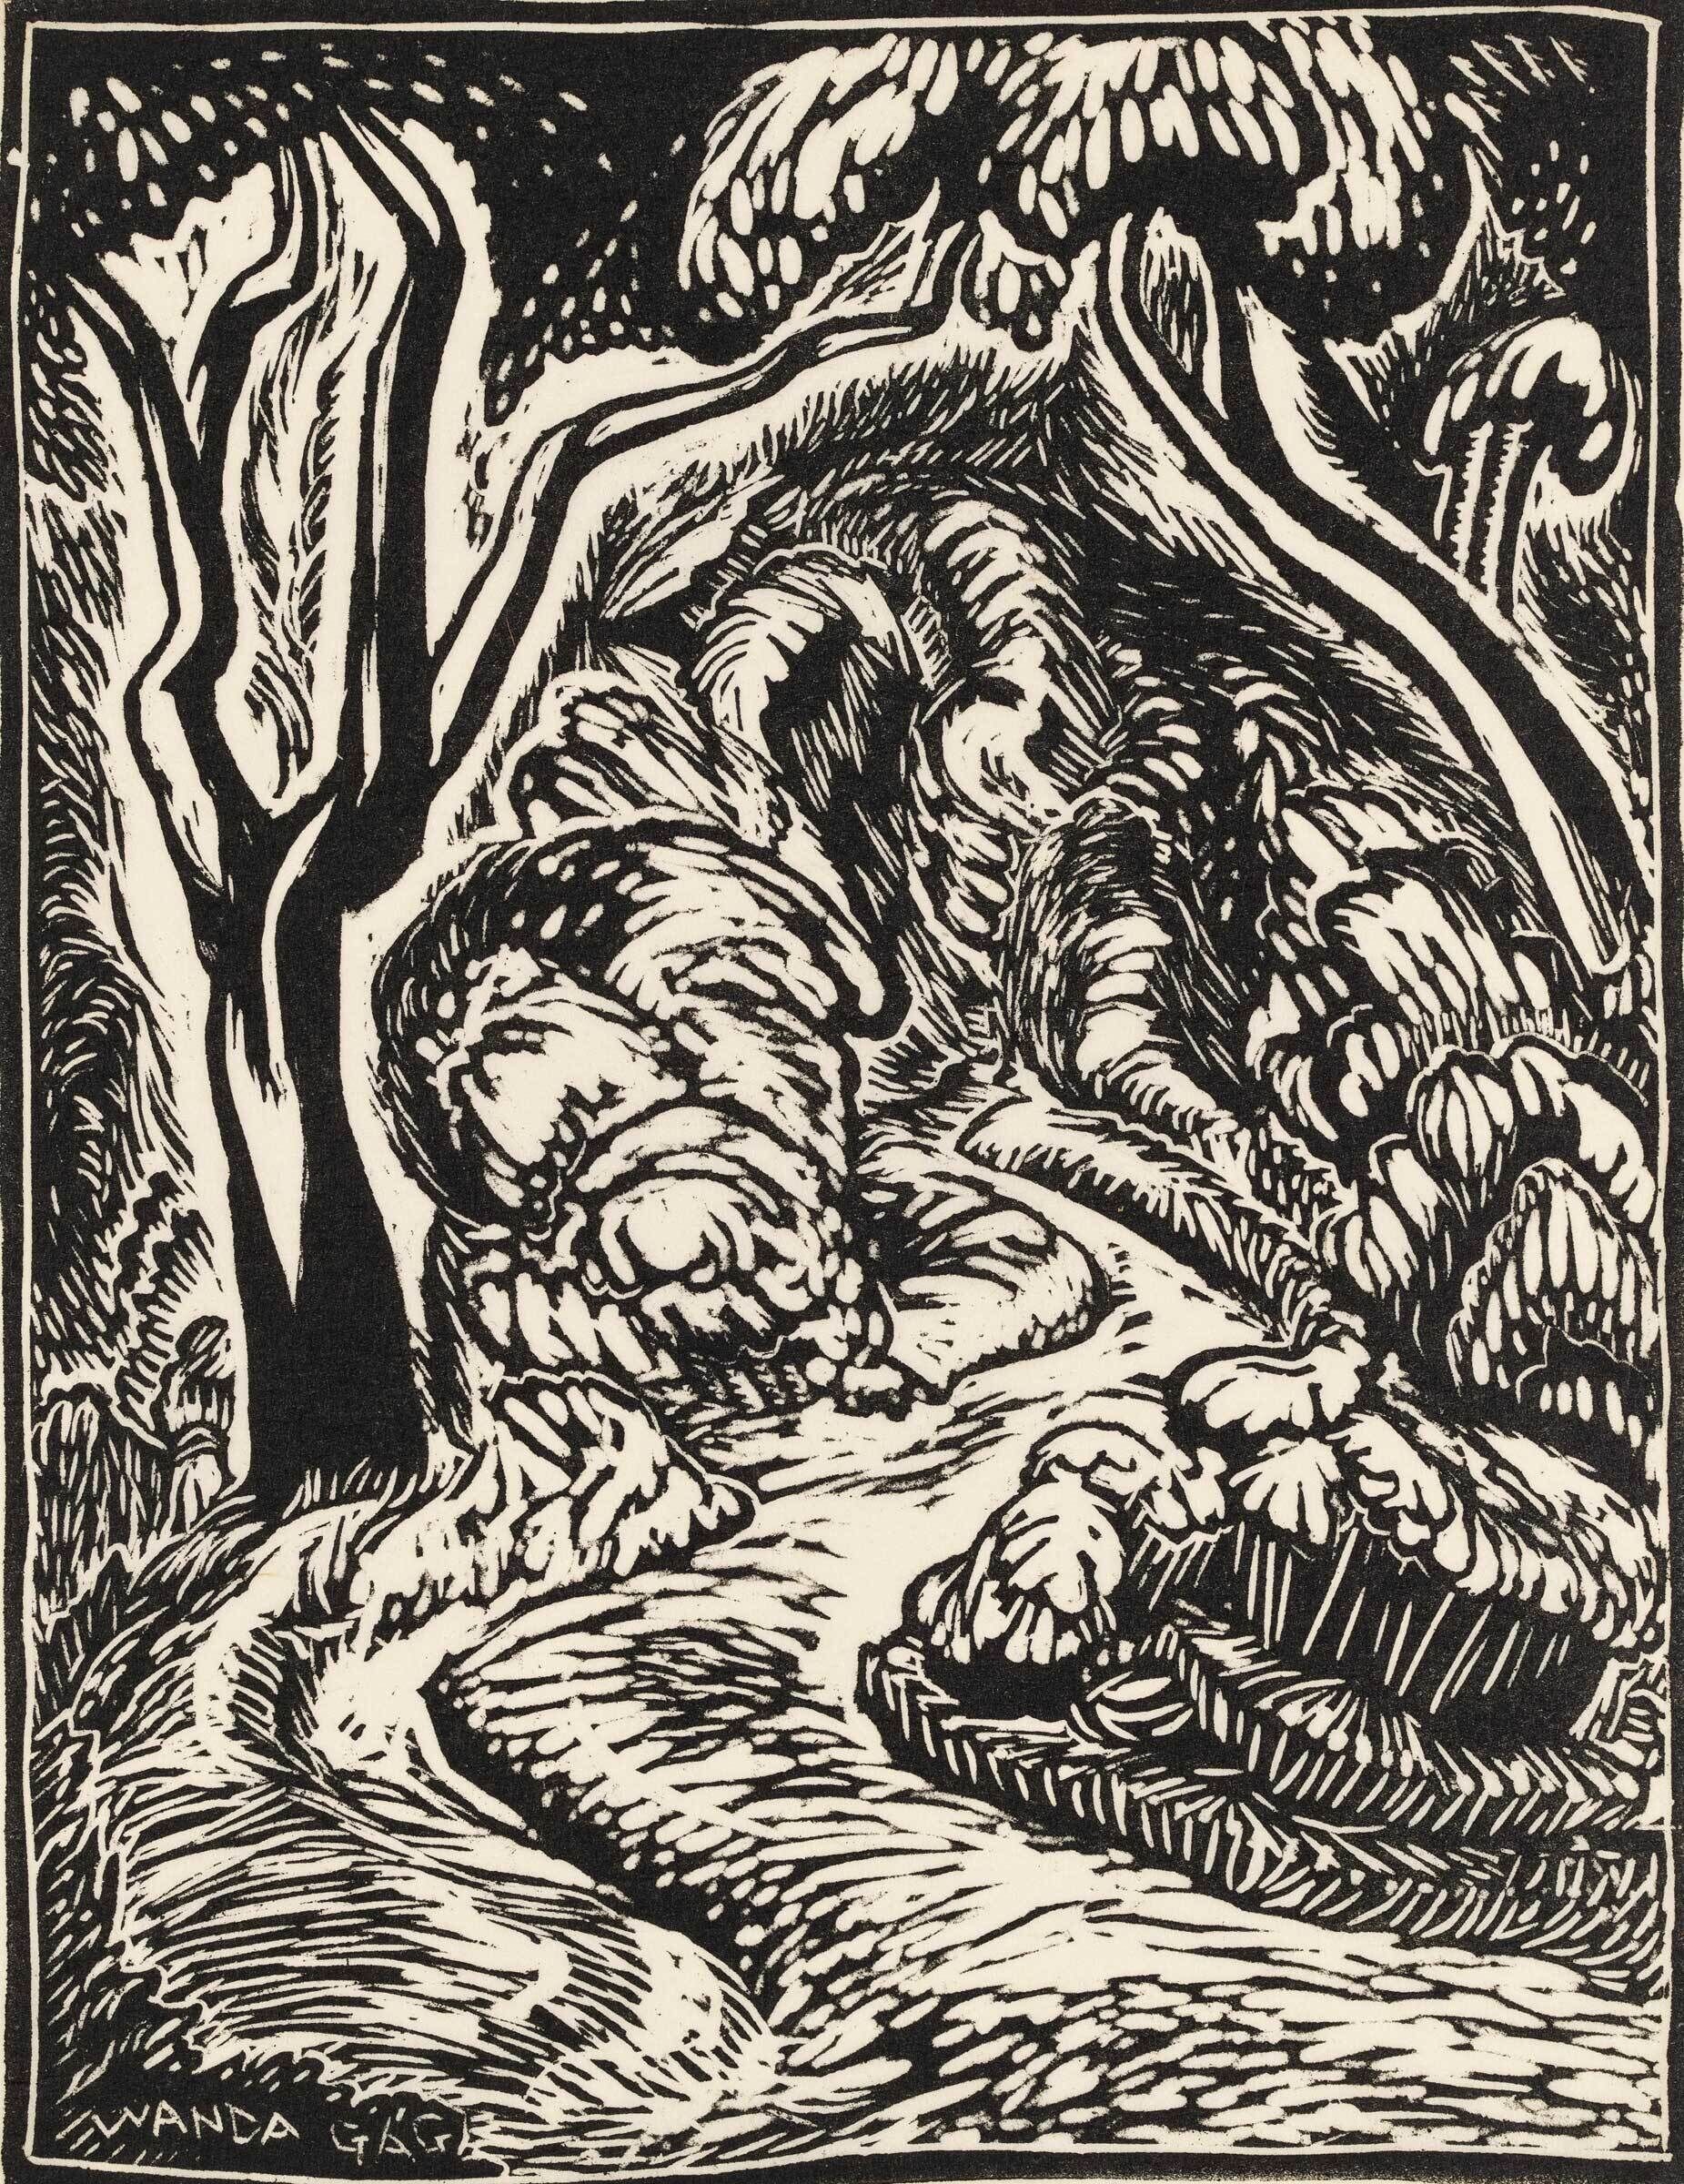 Black and white woodcut of a stylized forest scene with bold lines and contrasting patterns, signed by Wanda Gág.